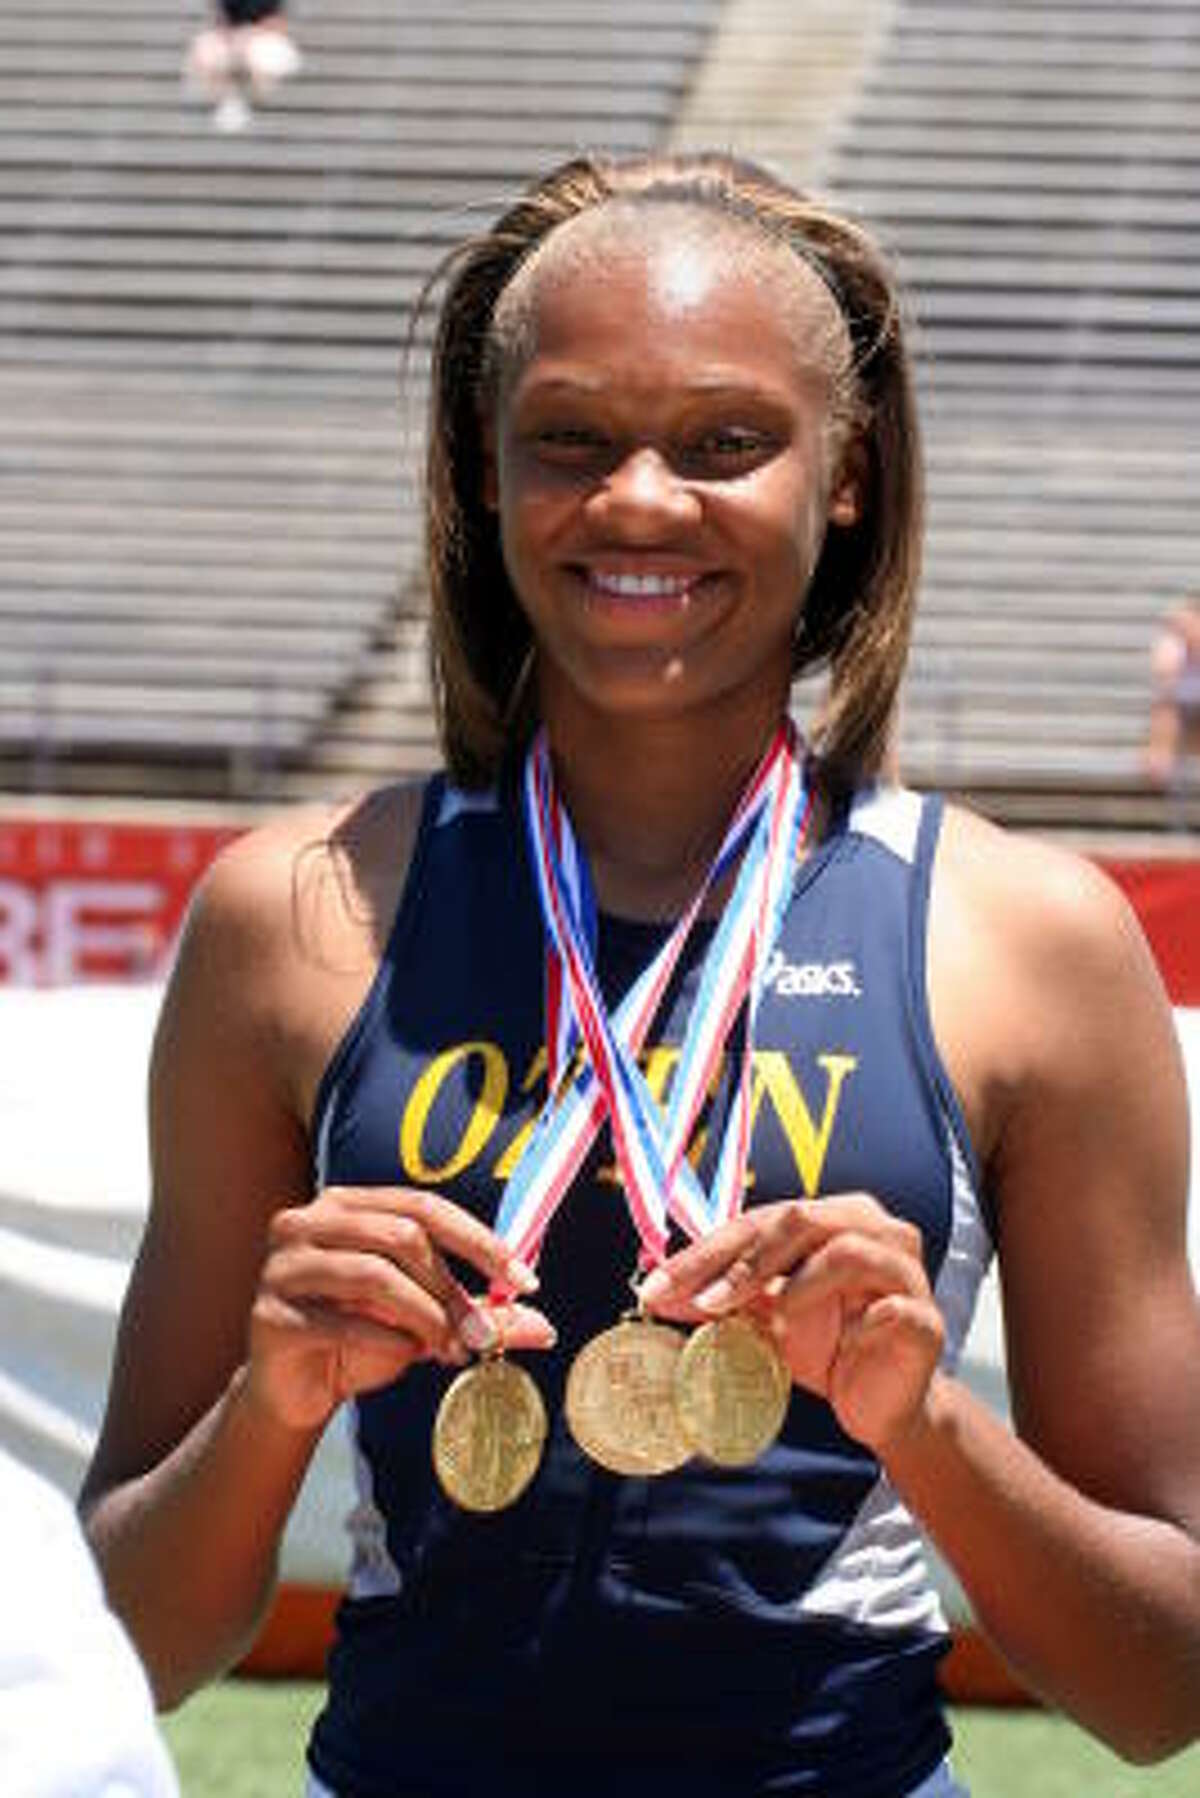 A'lexus Brannon took gold in the triplejump, long jump and the 100-meter hurdles.